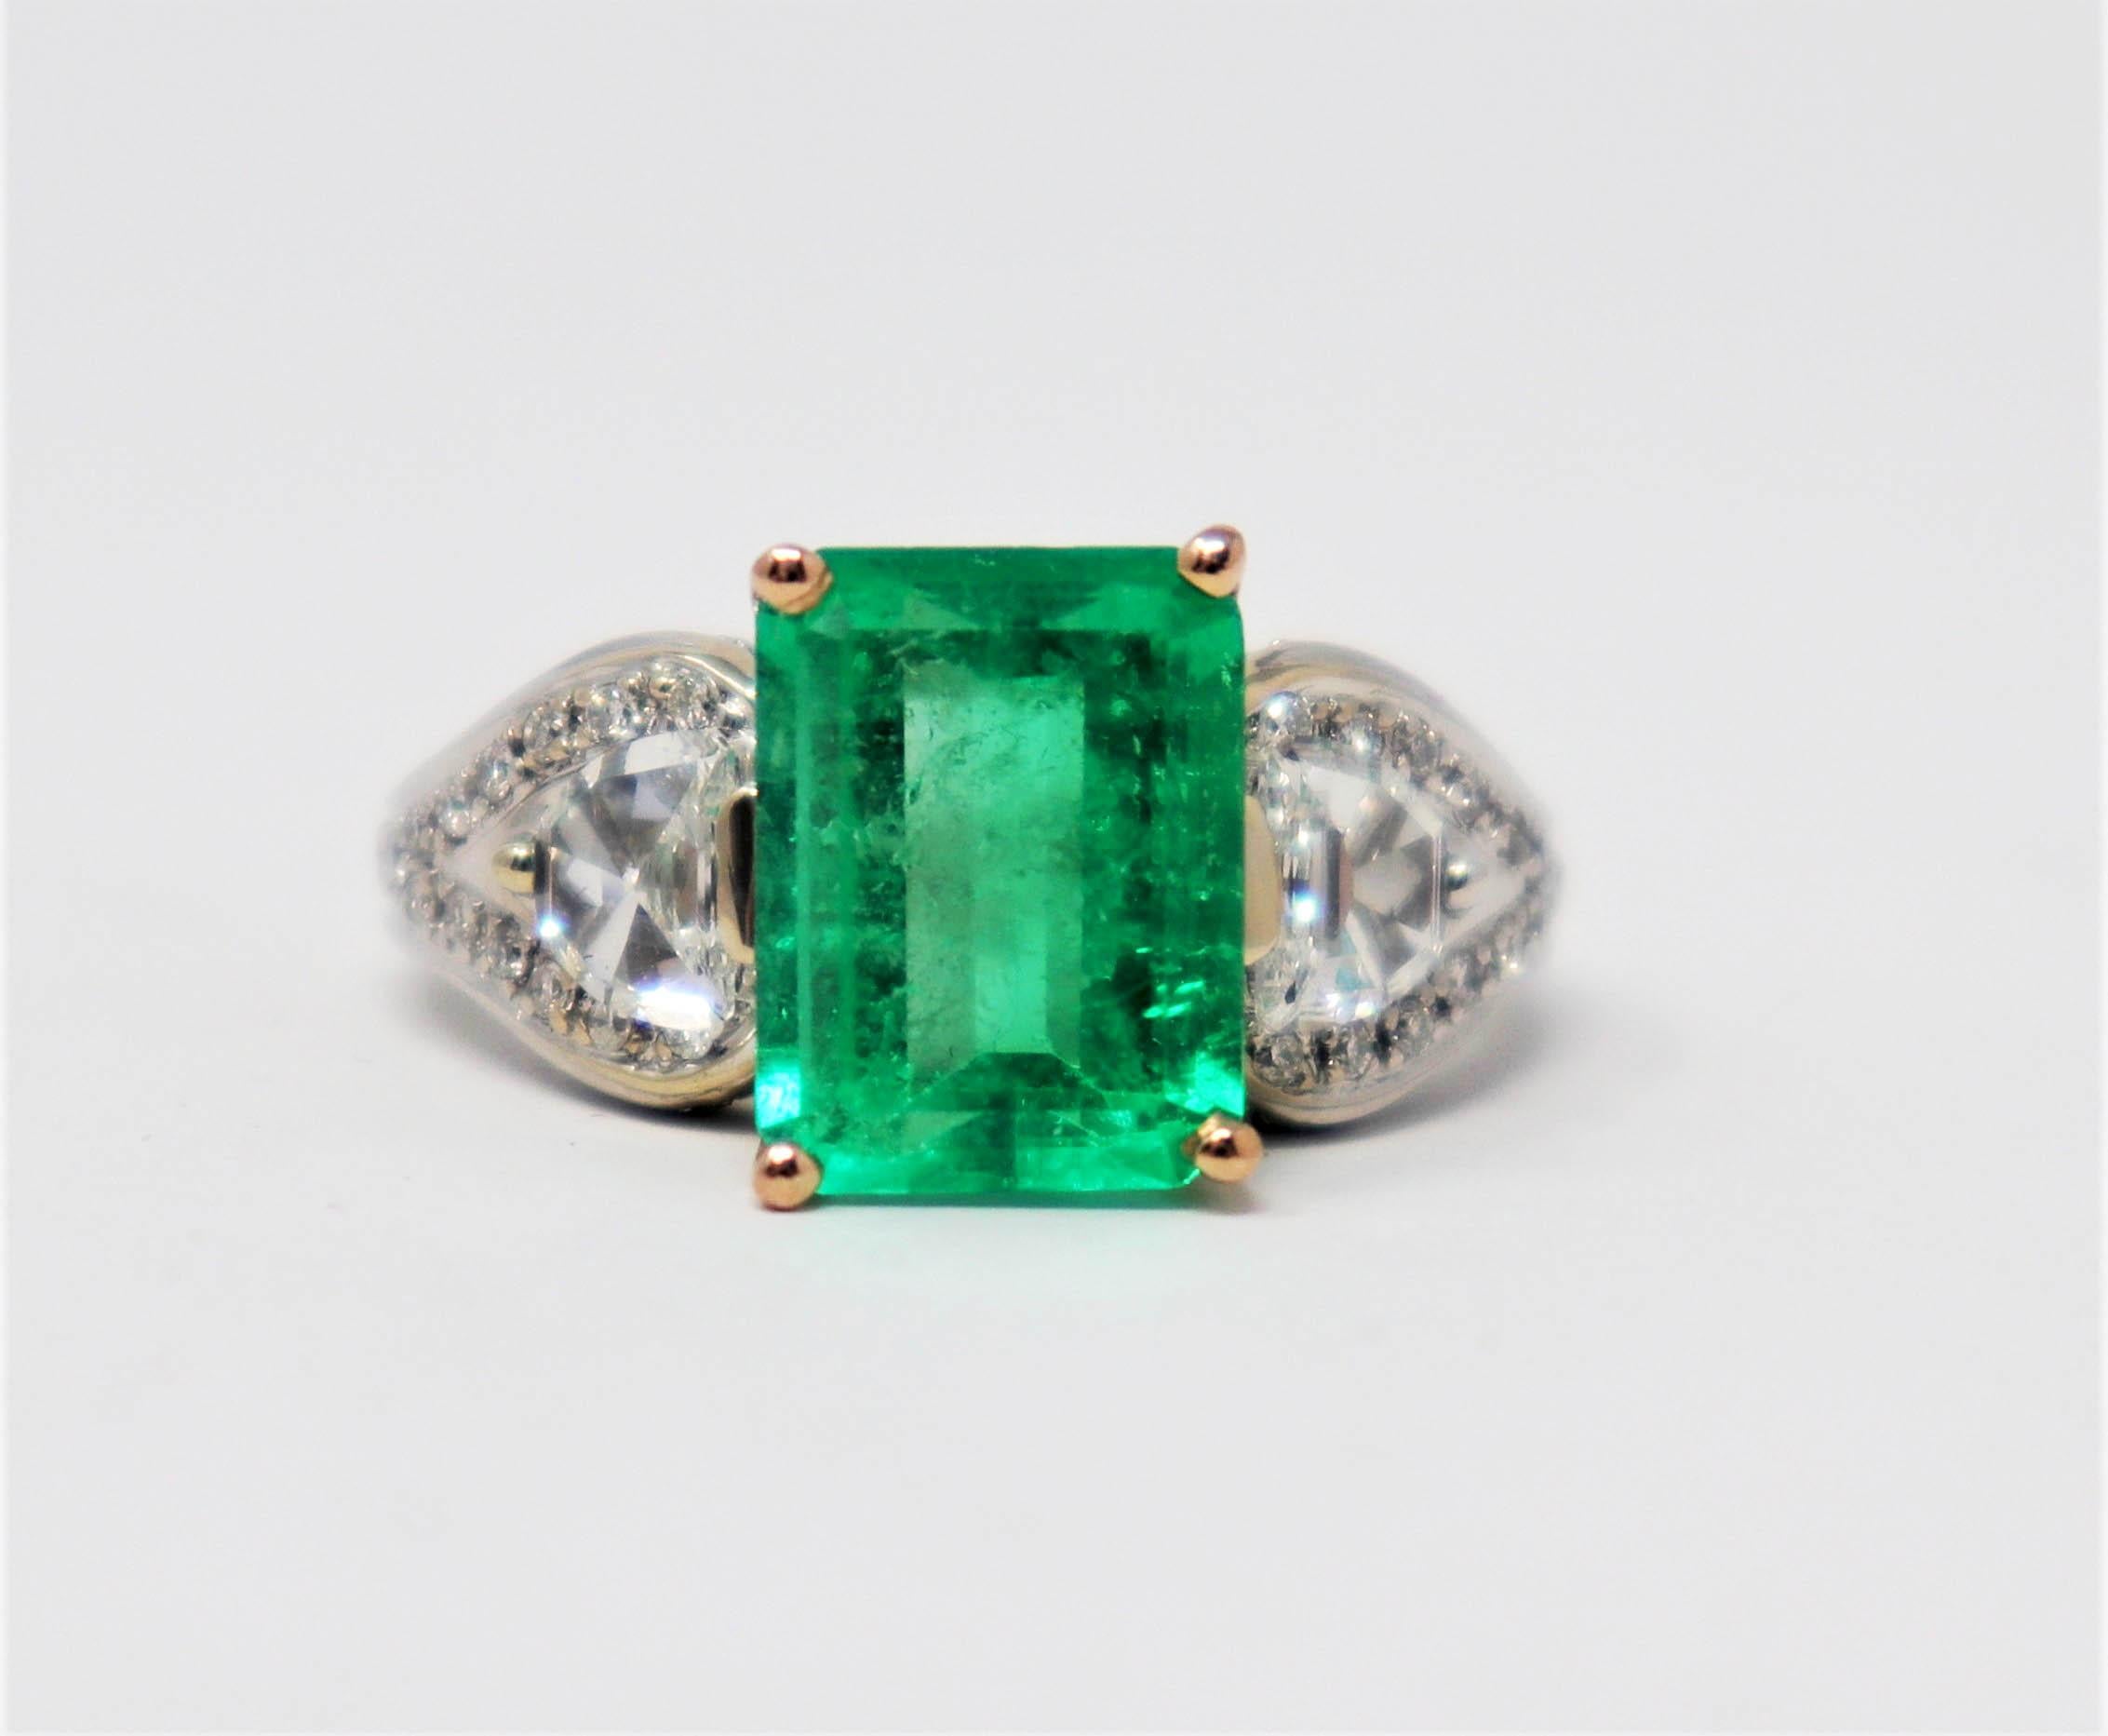 Ring size: 6.75

Spectacular natural emerald and diamond three stone ring designed by Henri Daussi. The brilliant bright green emerald stone pops beautifully against the bright white diamonds and really catches the viewers eye. You will absolutely